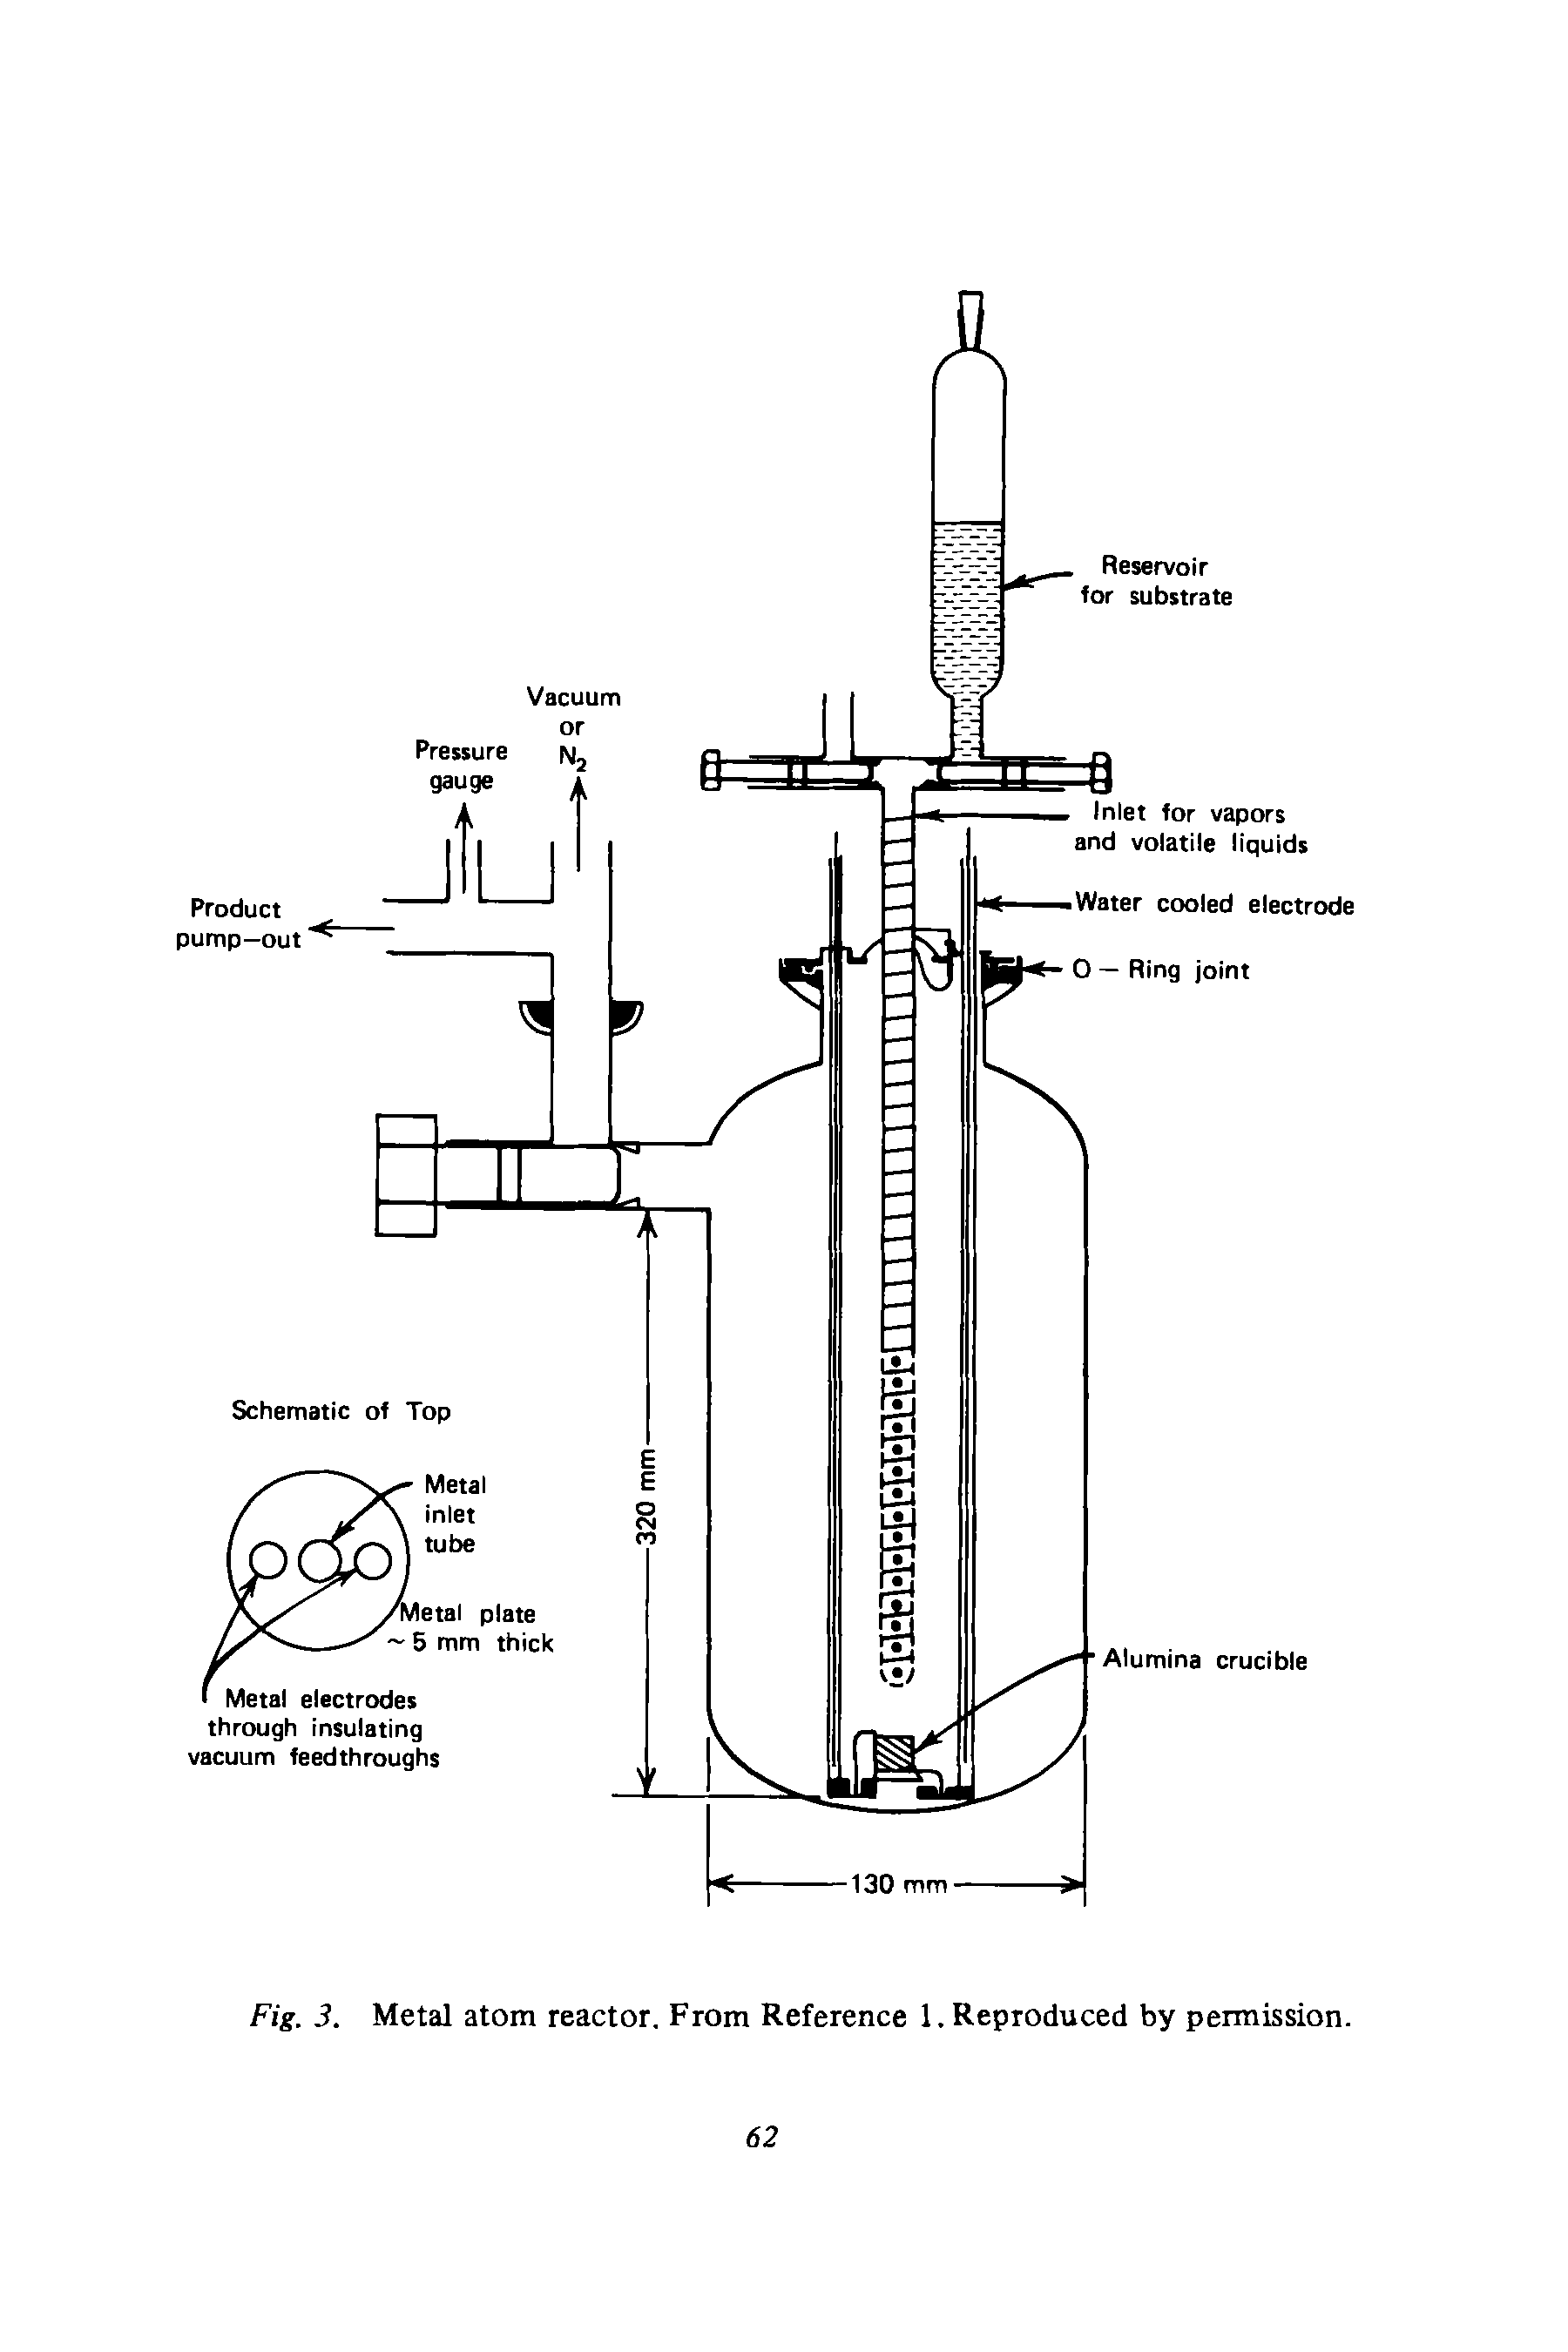 Fig. 3. Metal atom reactor. From Reference 1. Reproduced by permission.